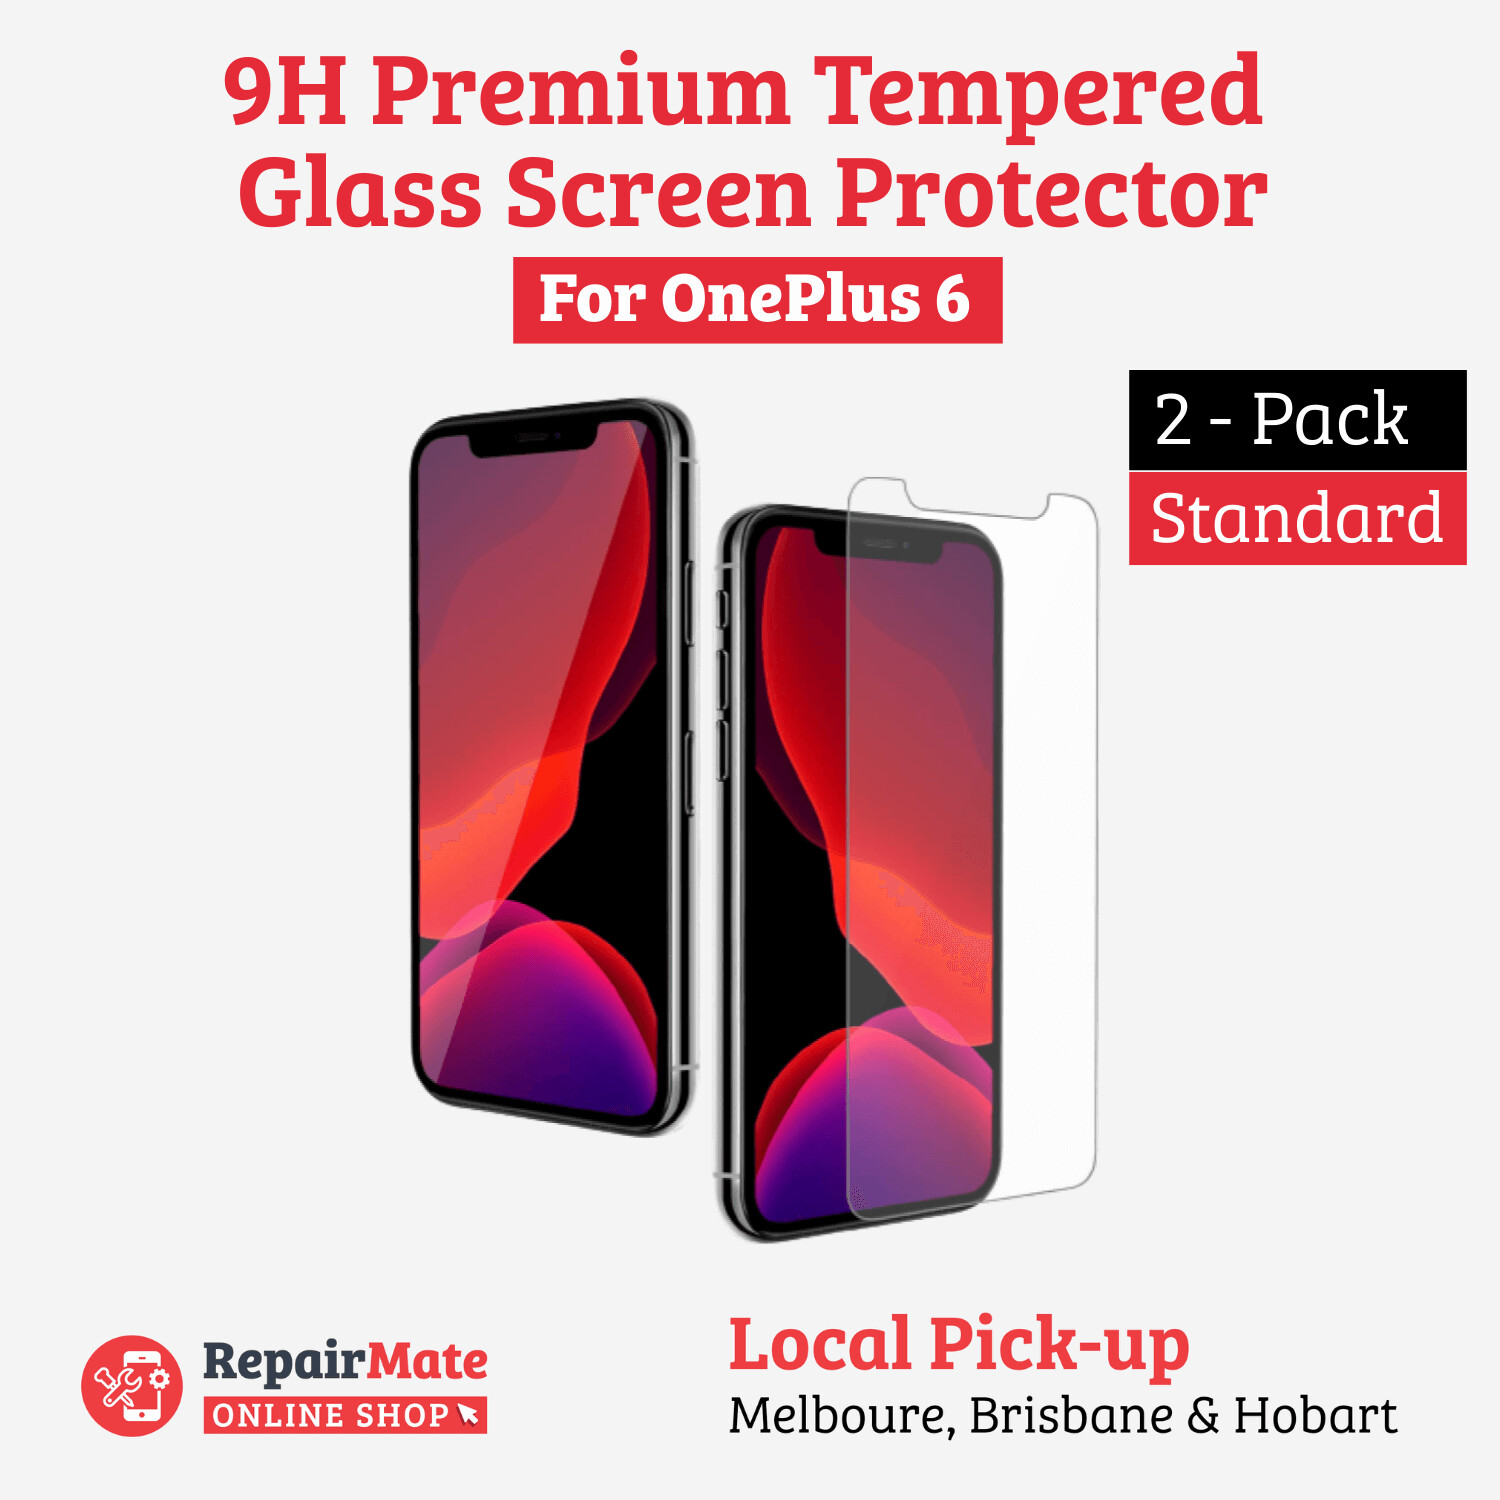 OnePlus 6 9H Premium Tempered Glass Screen Protector [2 Pack]